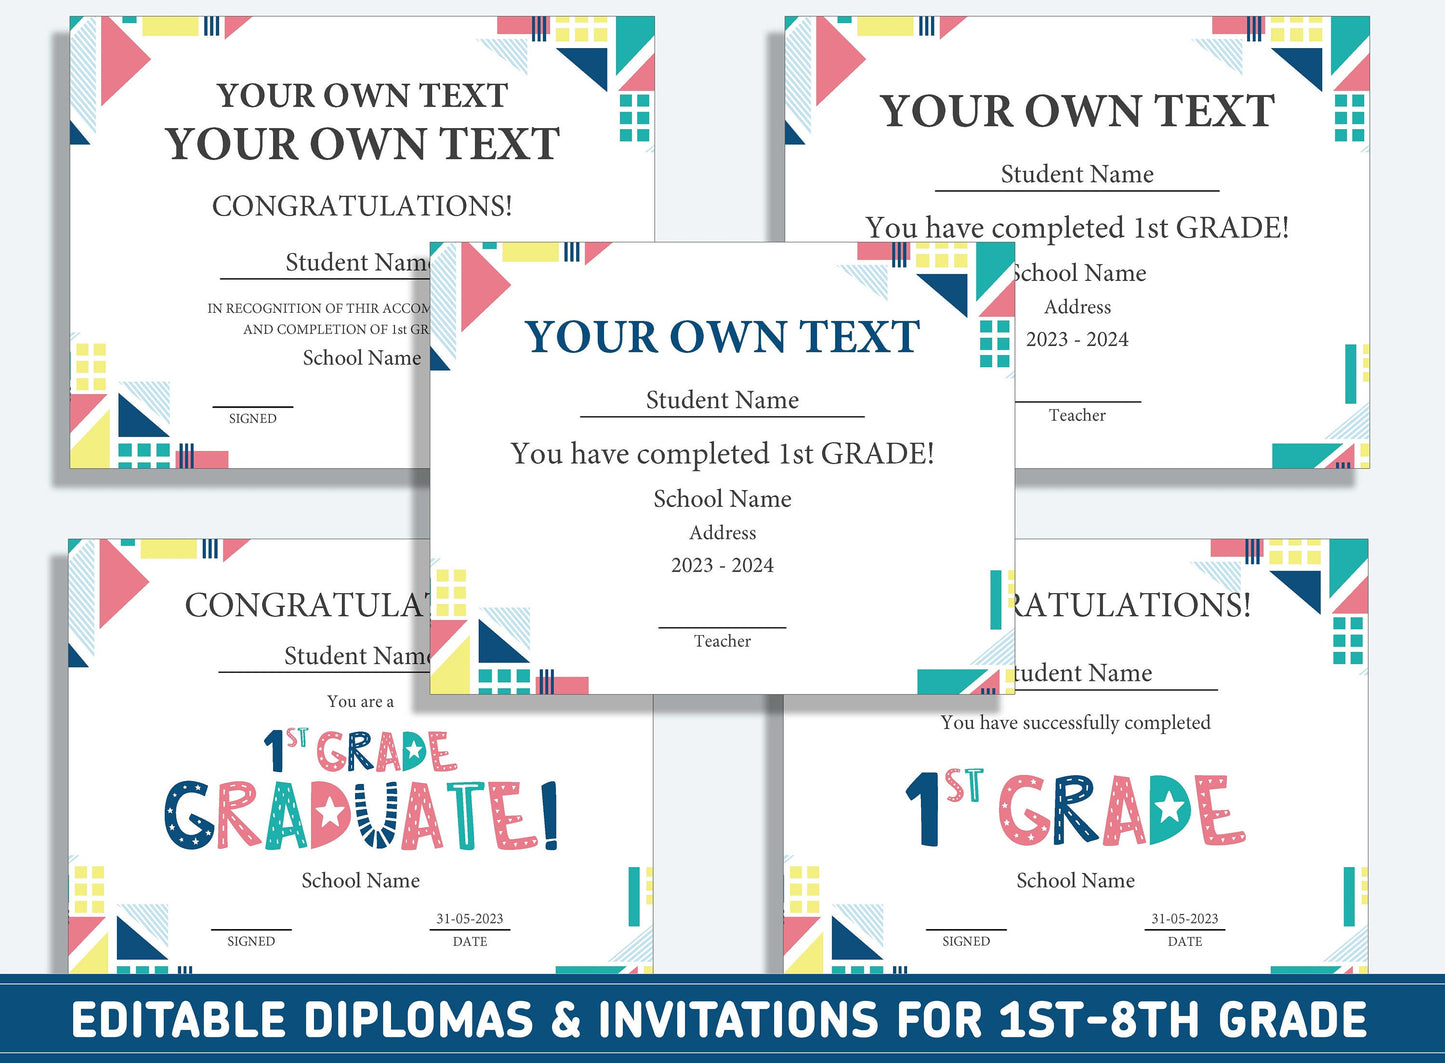 Editable 2nd Grade Diploma, 1st to 8th Grade Diploma, Certificate of Completion & Invitation, PDF File, Instant Download